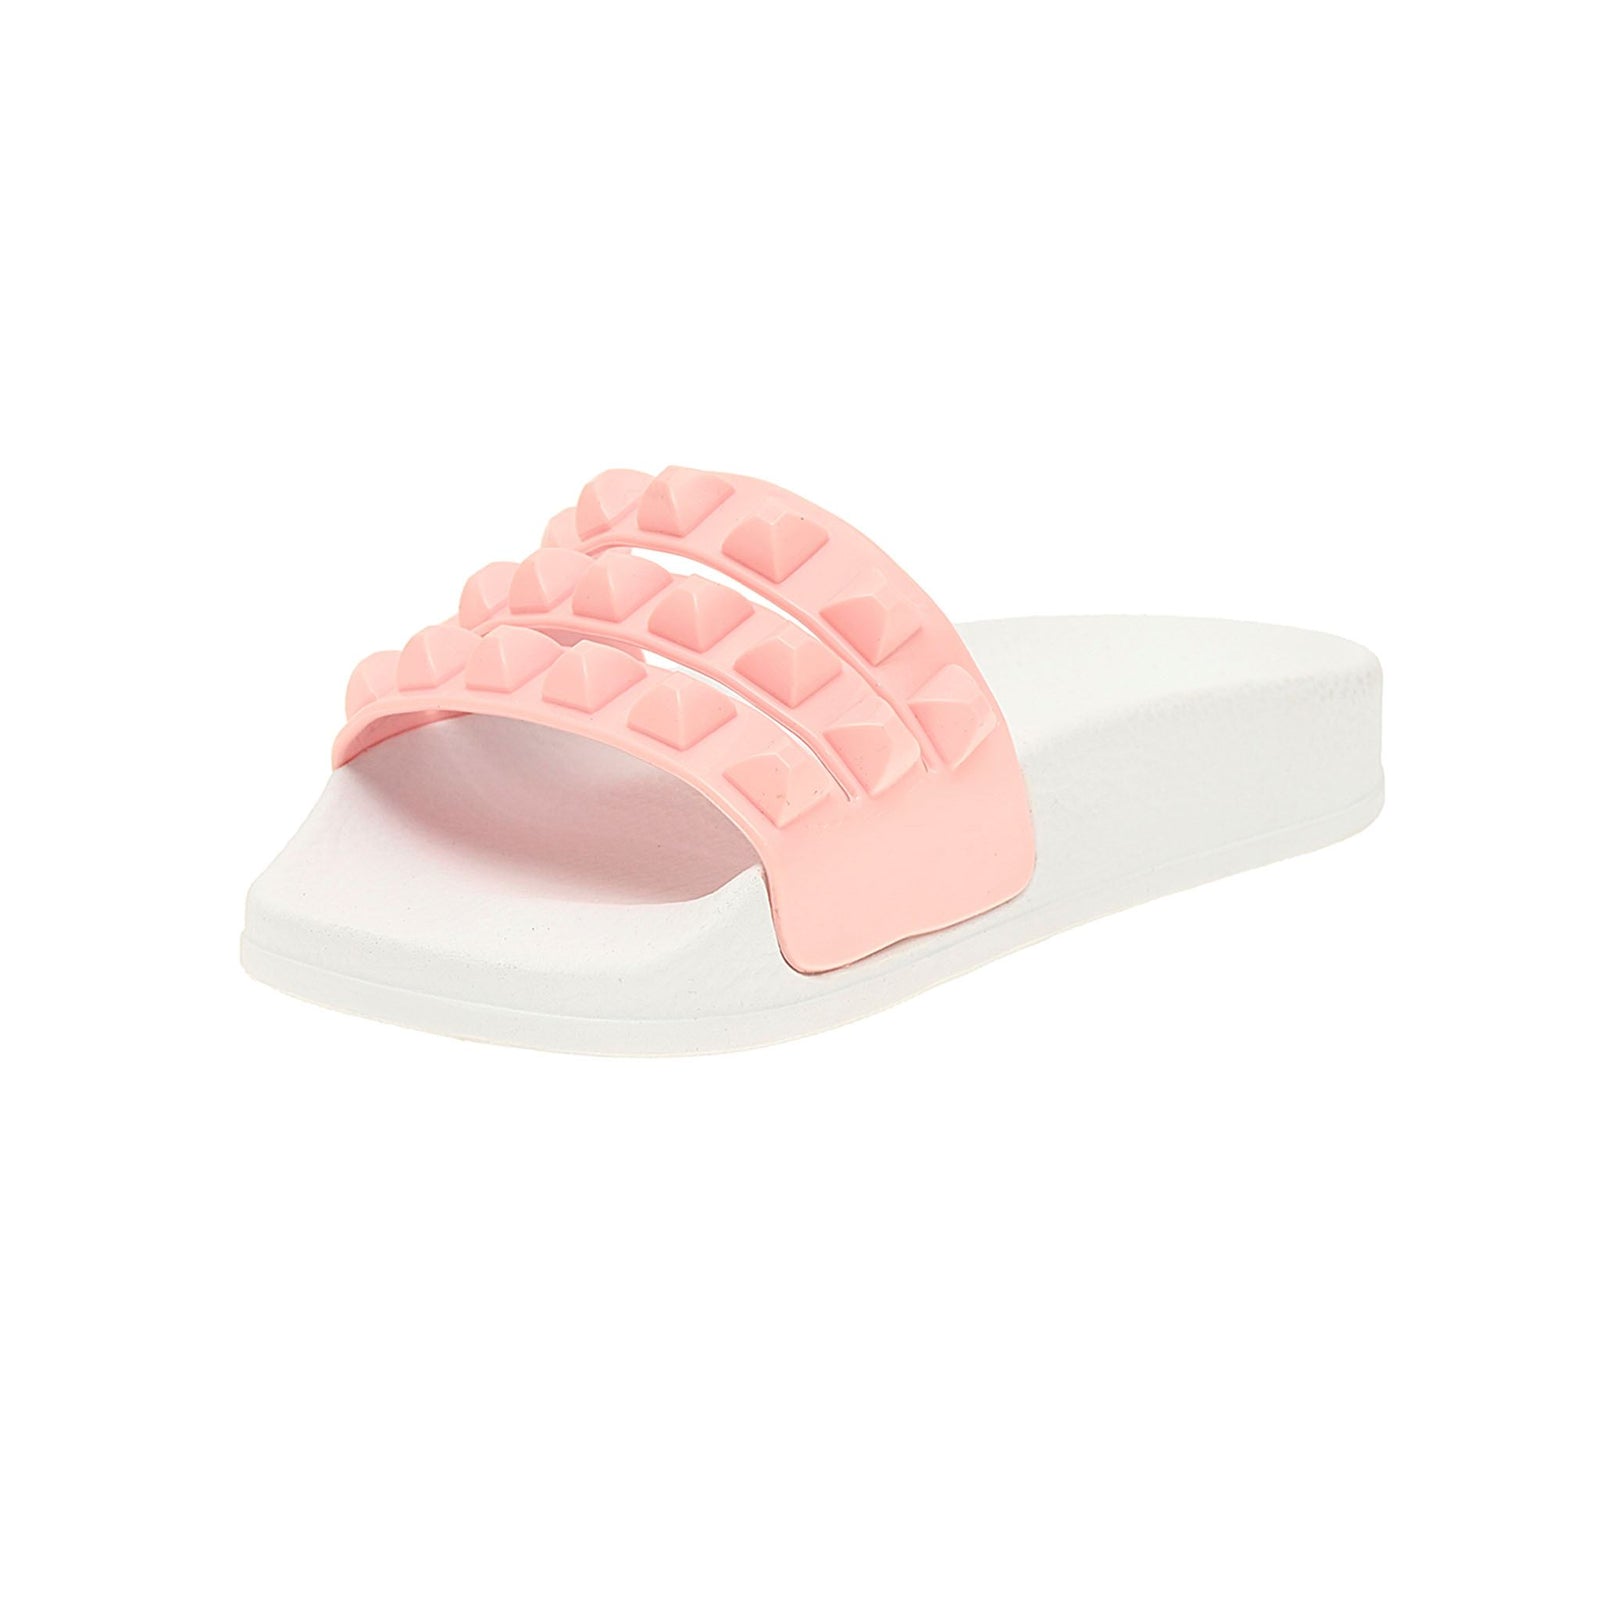 jelly kids sandals, Franco kids shoes, jelly toddler sandals from minicarmensol.